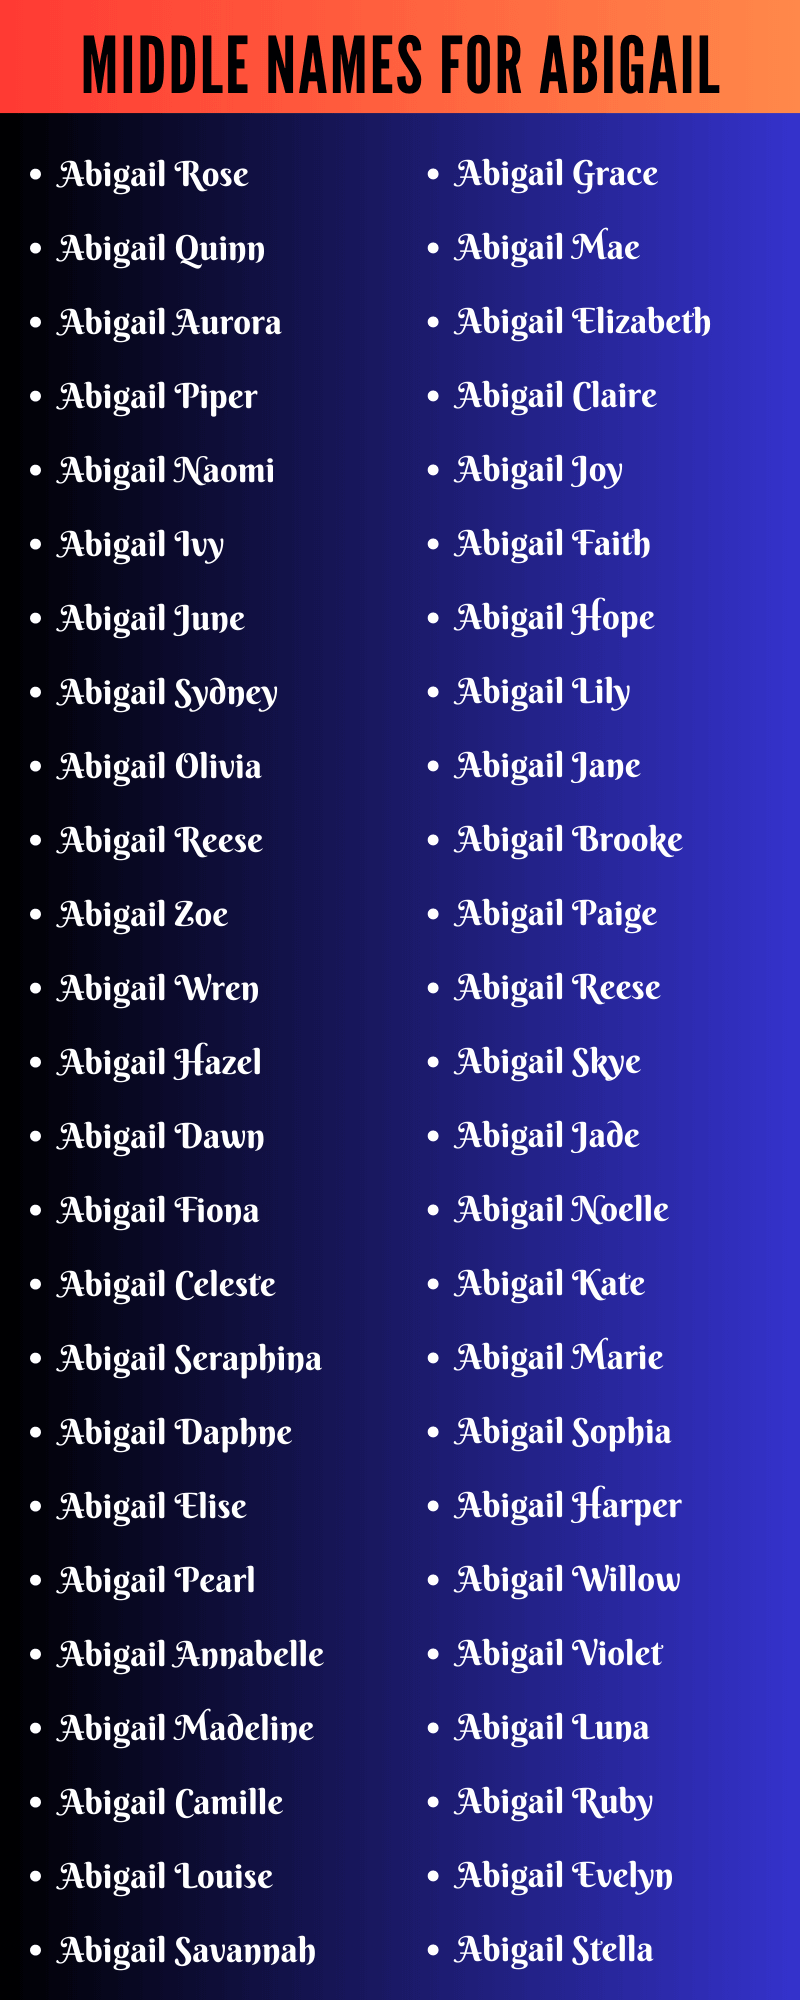 Middle Names For Abigail